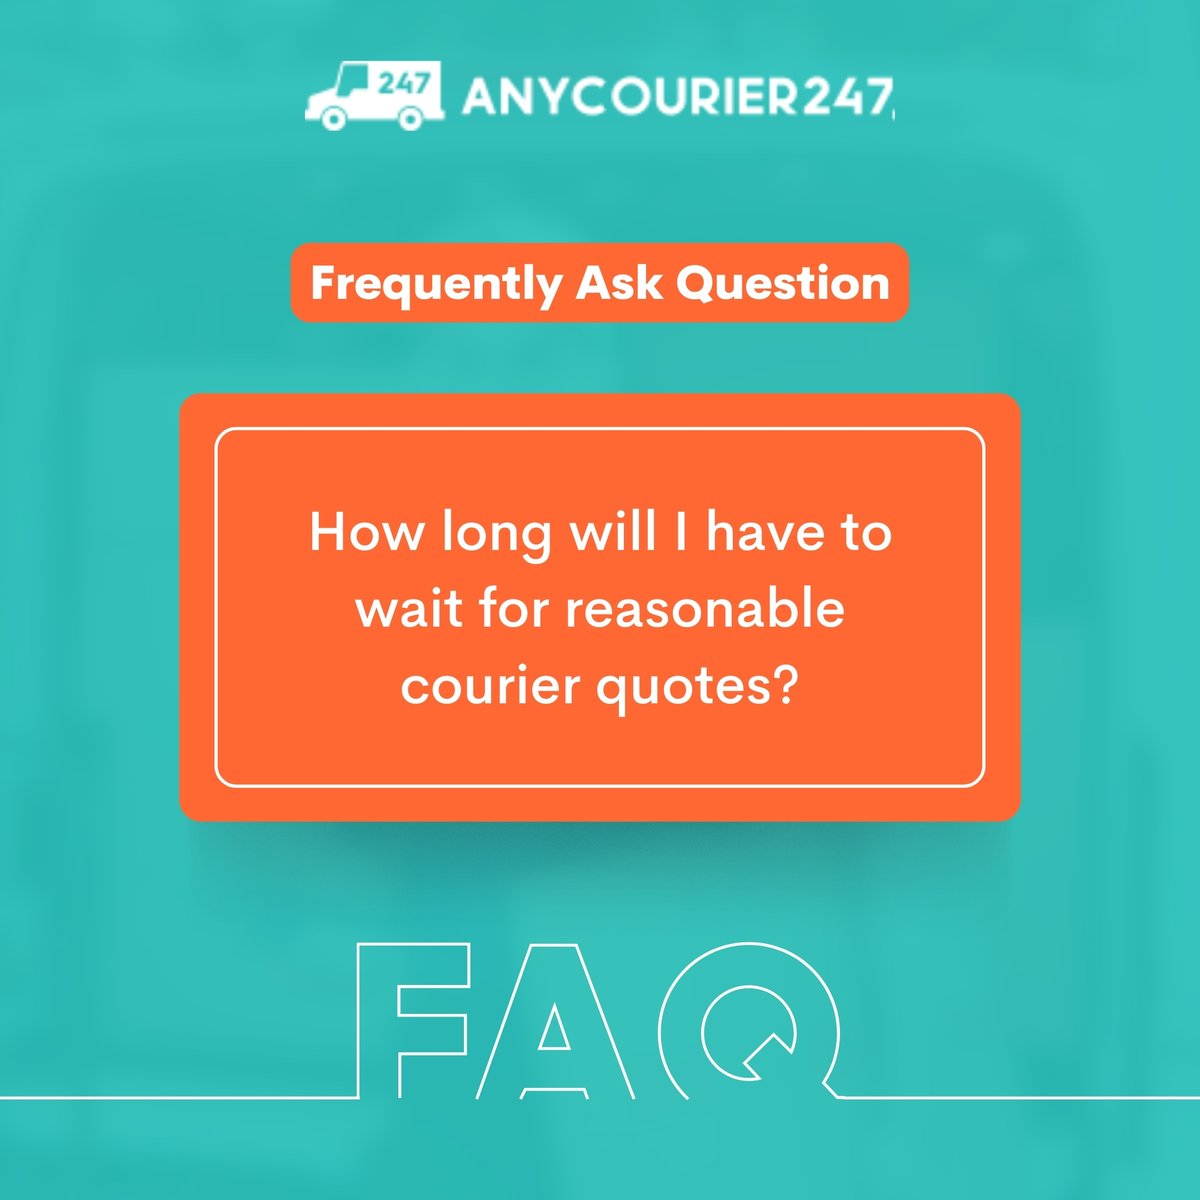 This depends on the nature of your shipment and the travel distance. However, the first quotes tend to arrive within the hour. If you aren’t receiving as many quotes as you’d hoped for, consider adding more details to your job listing.
#anycourier247 #couriermarketplace